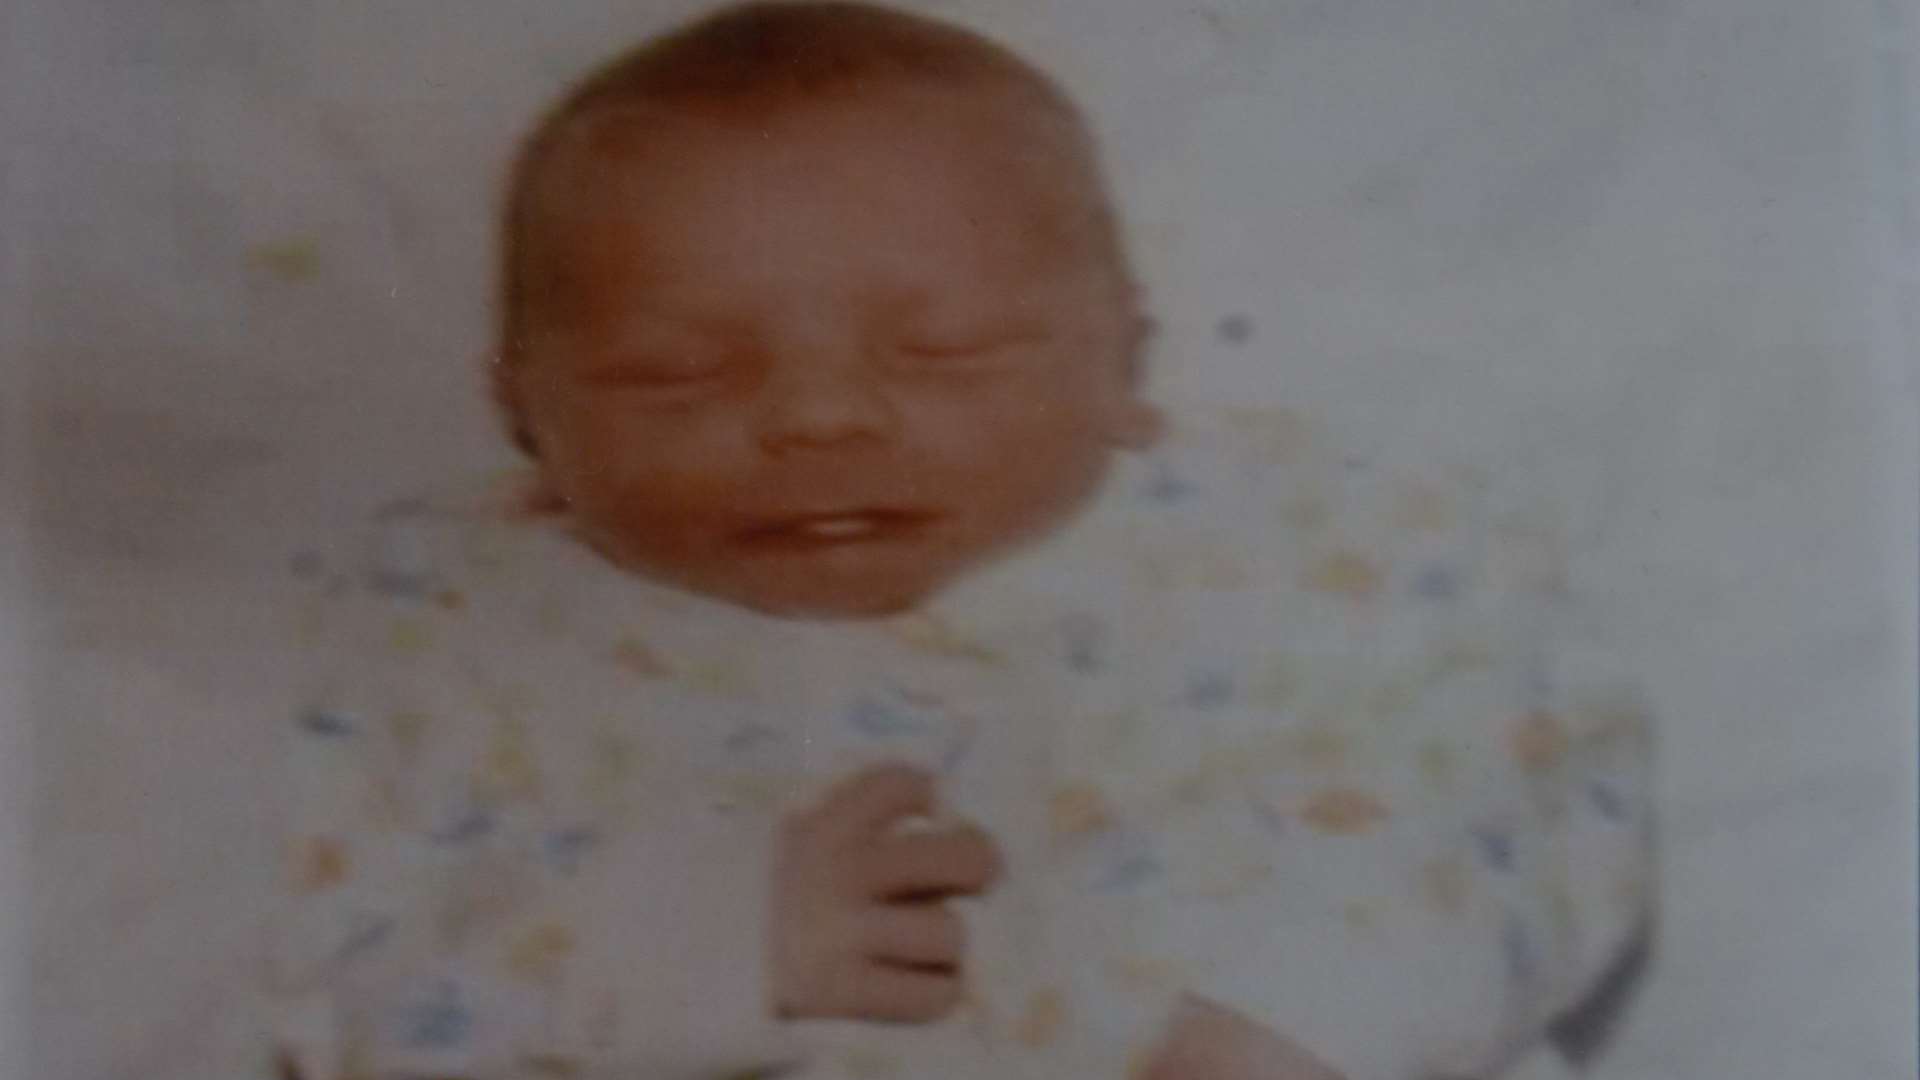 Baby Curtis Watts who died aged 15 weeks